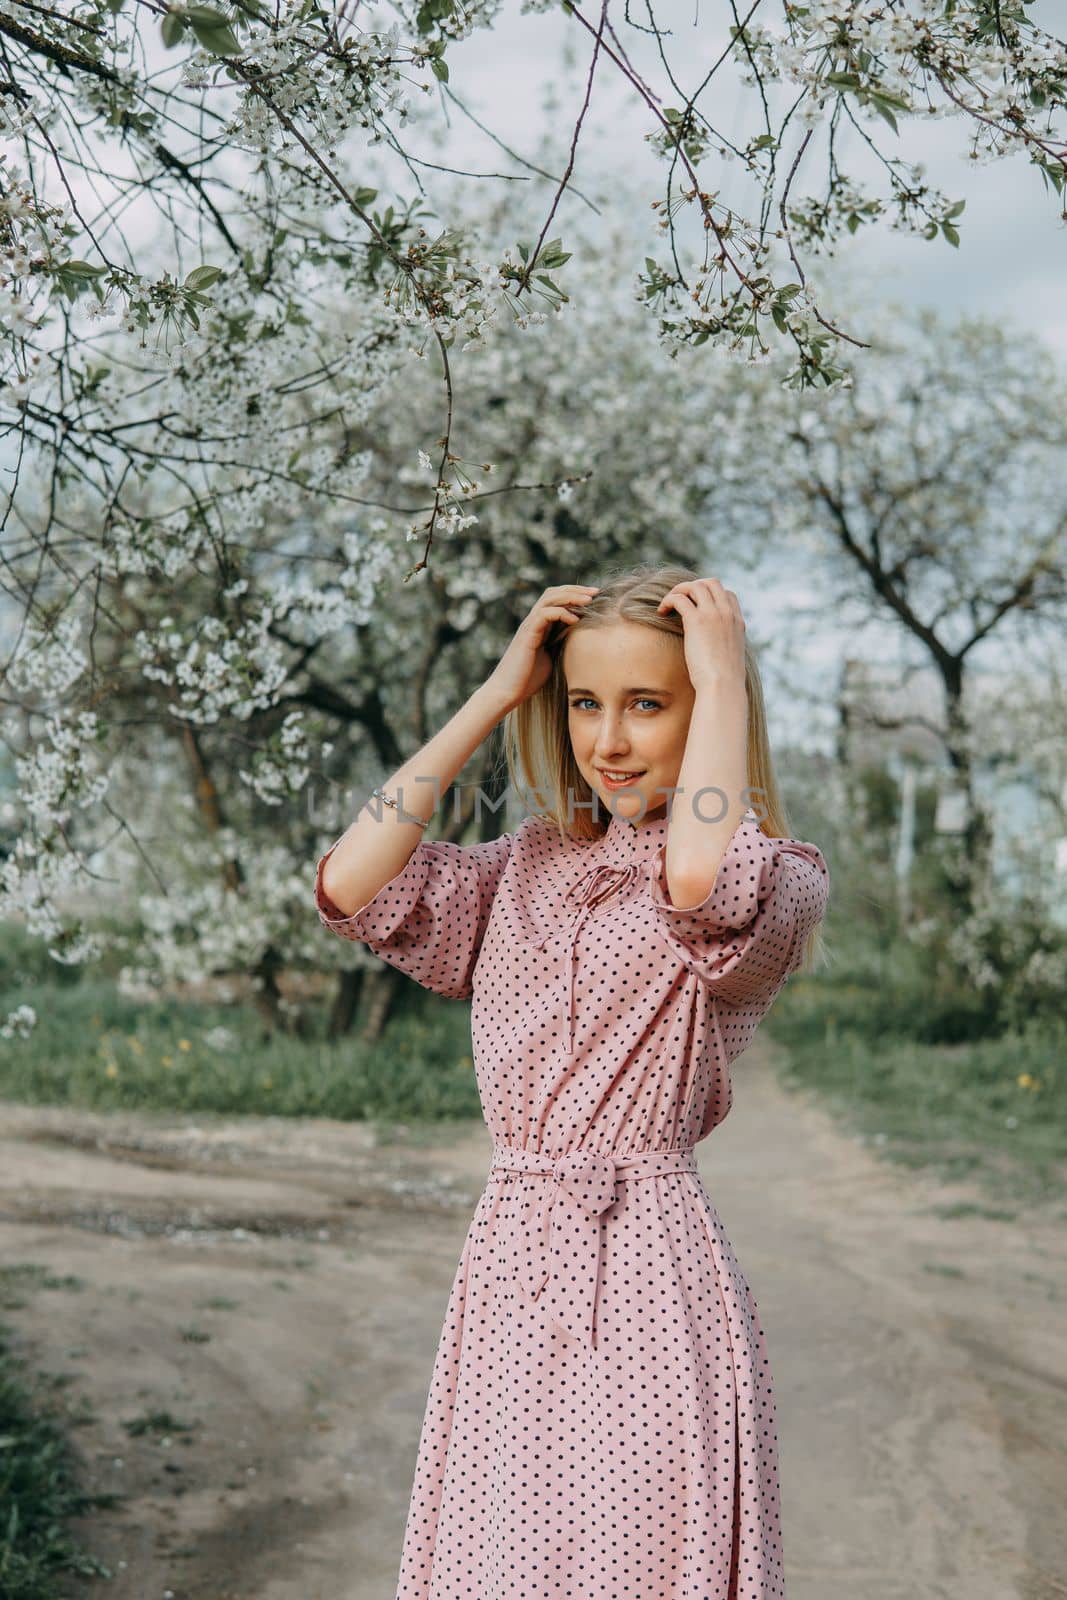 Blonde girl on a spring walk in the garden with cherry blossoms. Female portrait, close-up. A girl in a pink polka dot dress. by Annu1tochka